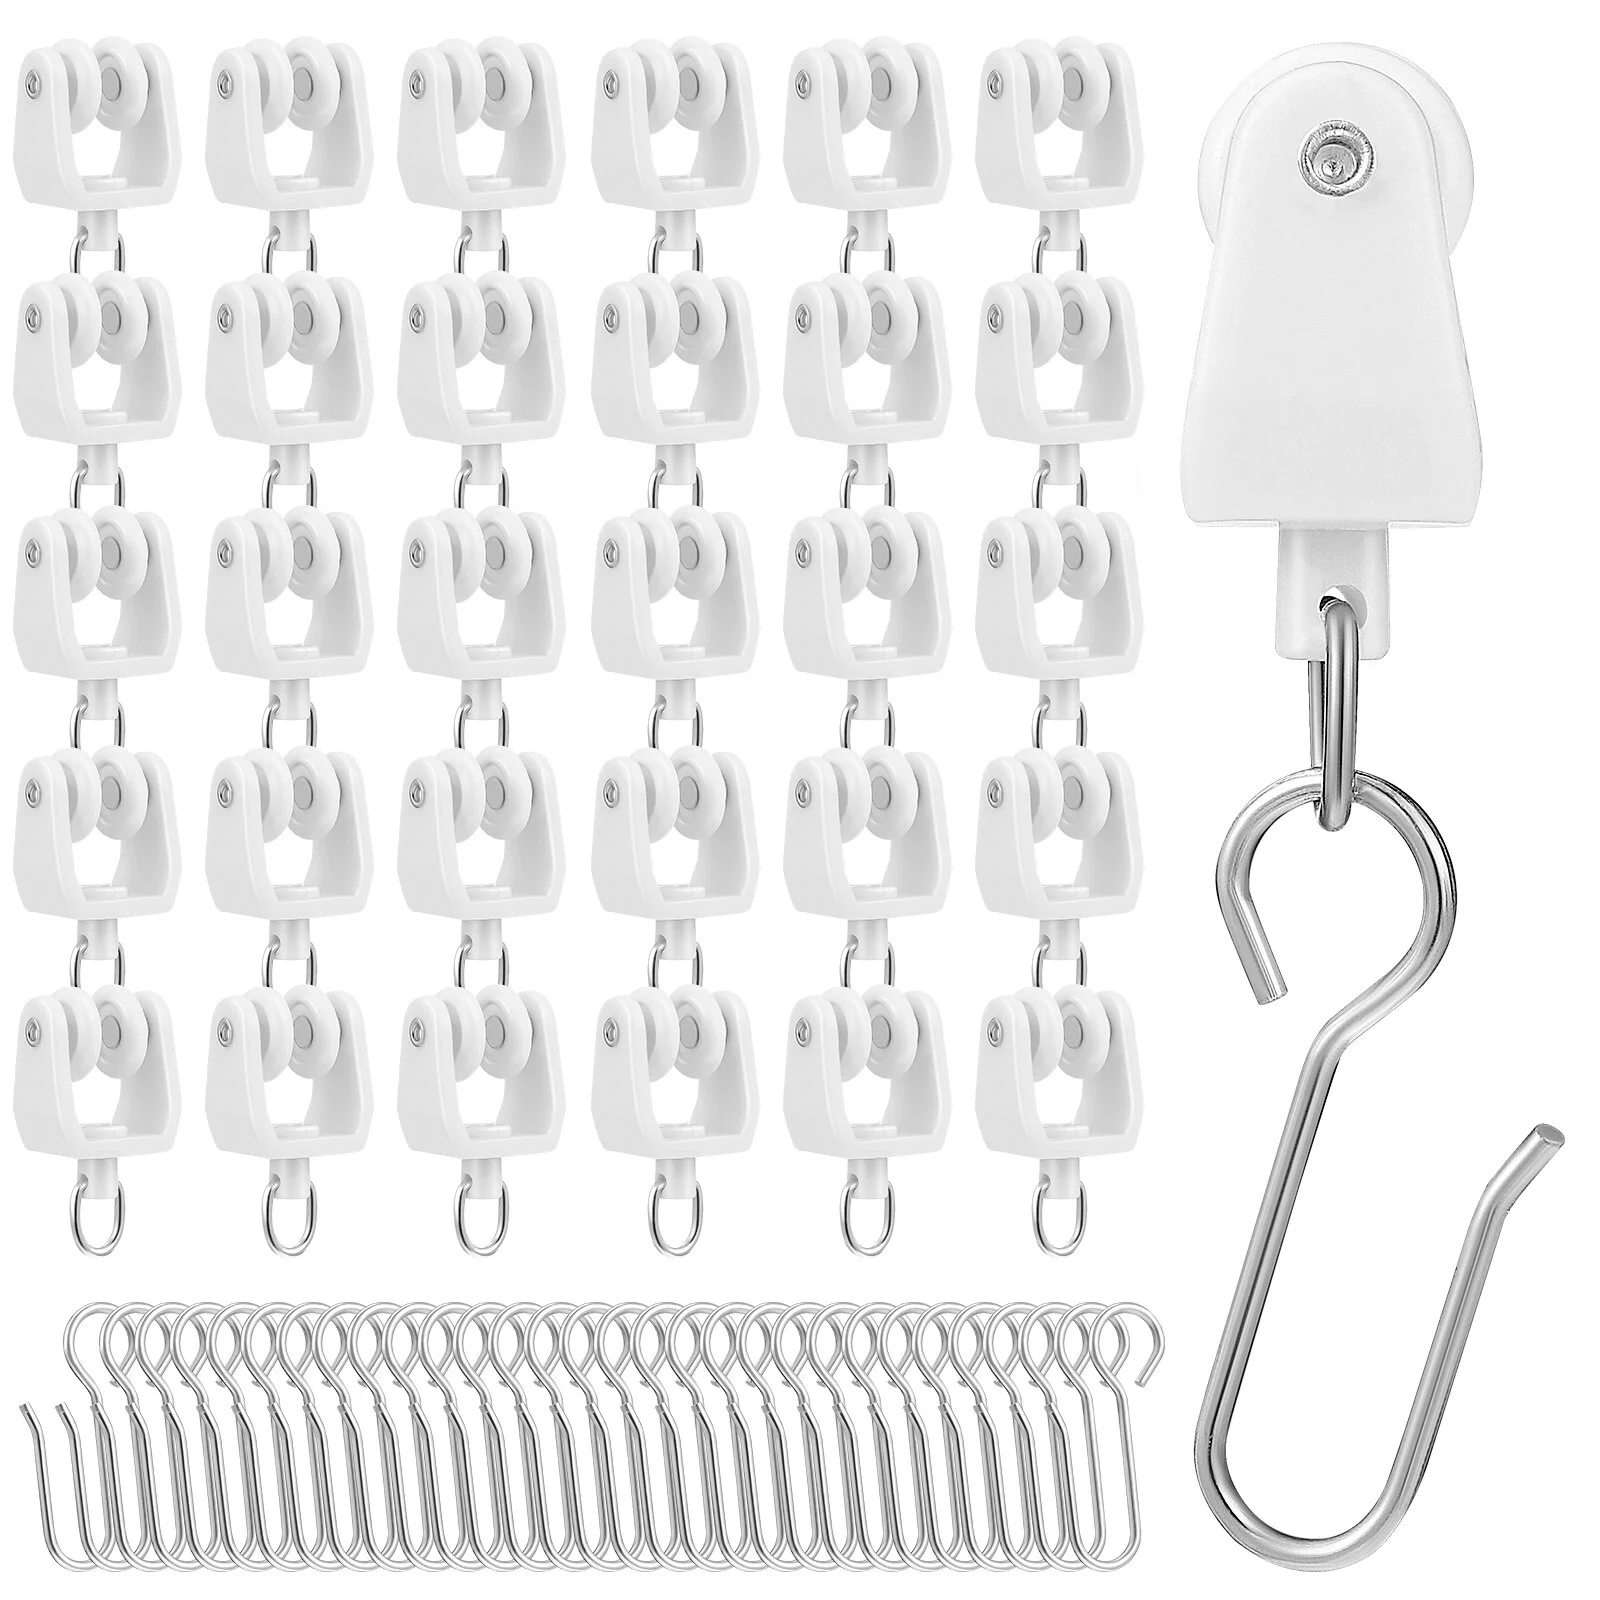 

30 Pcs Accessories Plastic Hooks Curtain Track Rollers Systems Shower Iron Glider Rails Slider